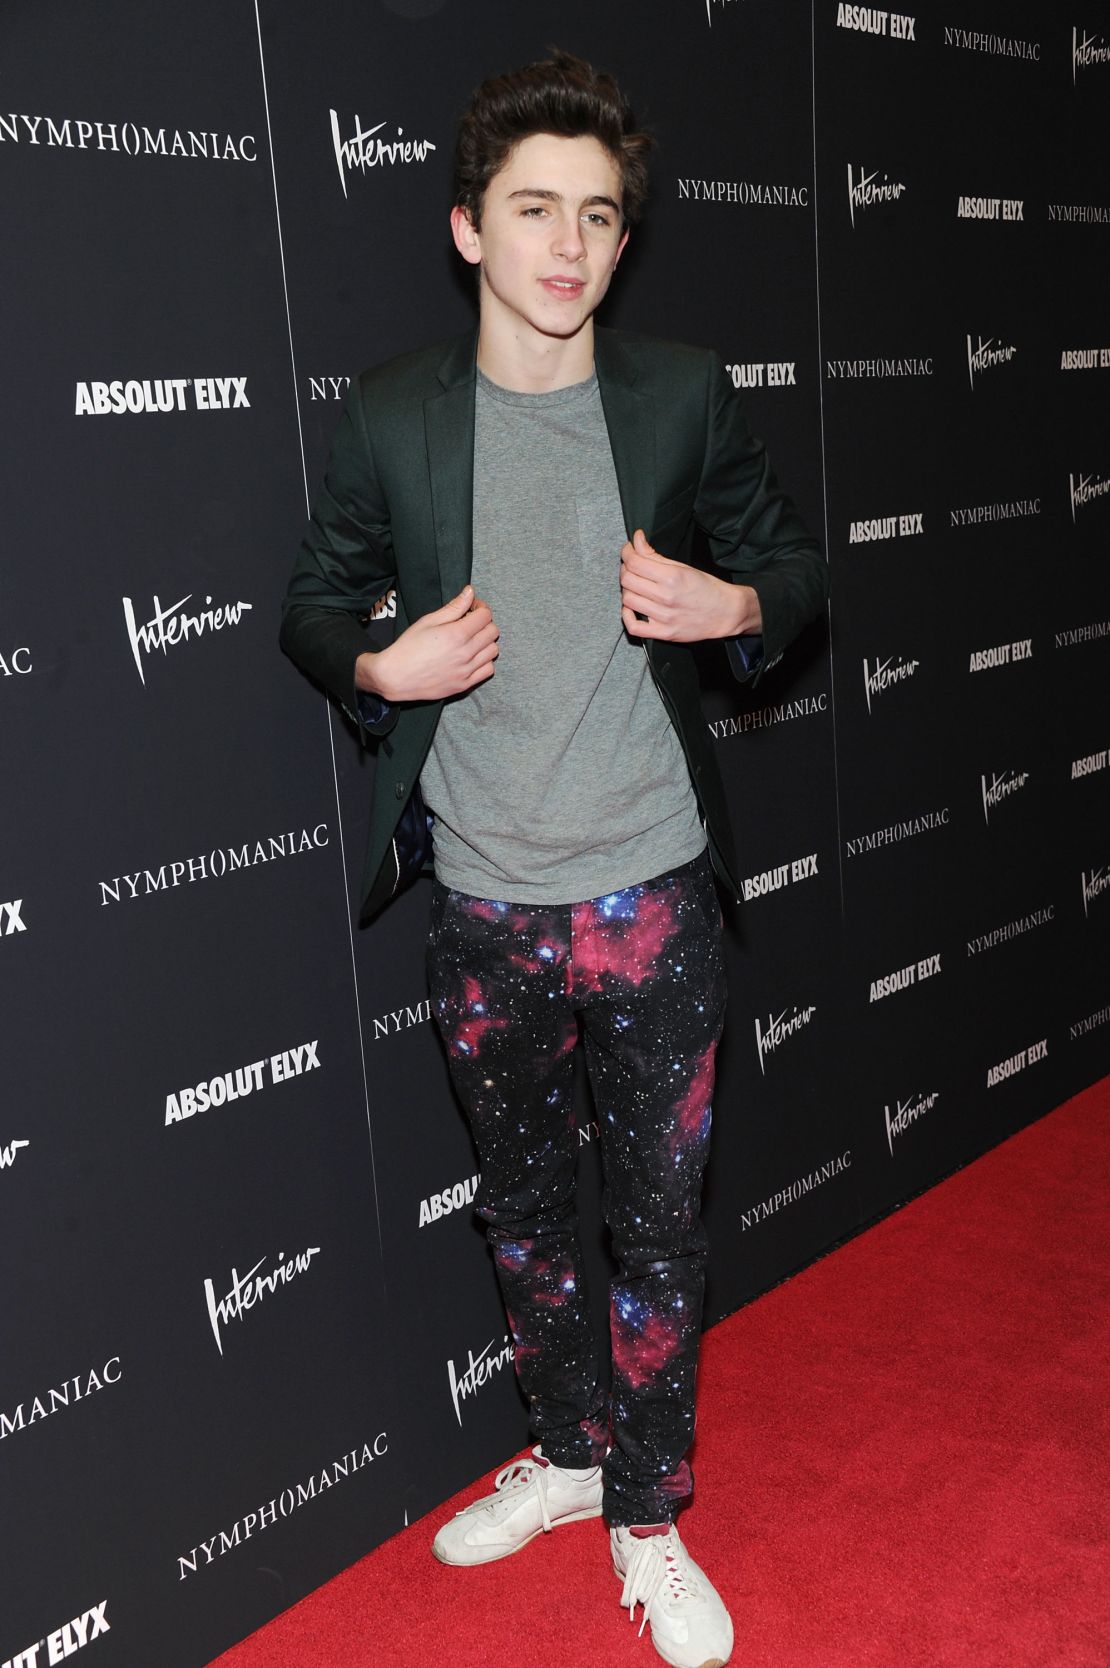 Timothee Chalamet in 2014 wearing galaxy-print trousers to a screening of "Nymphomaniac."